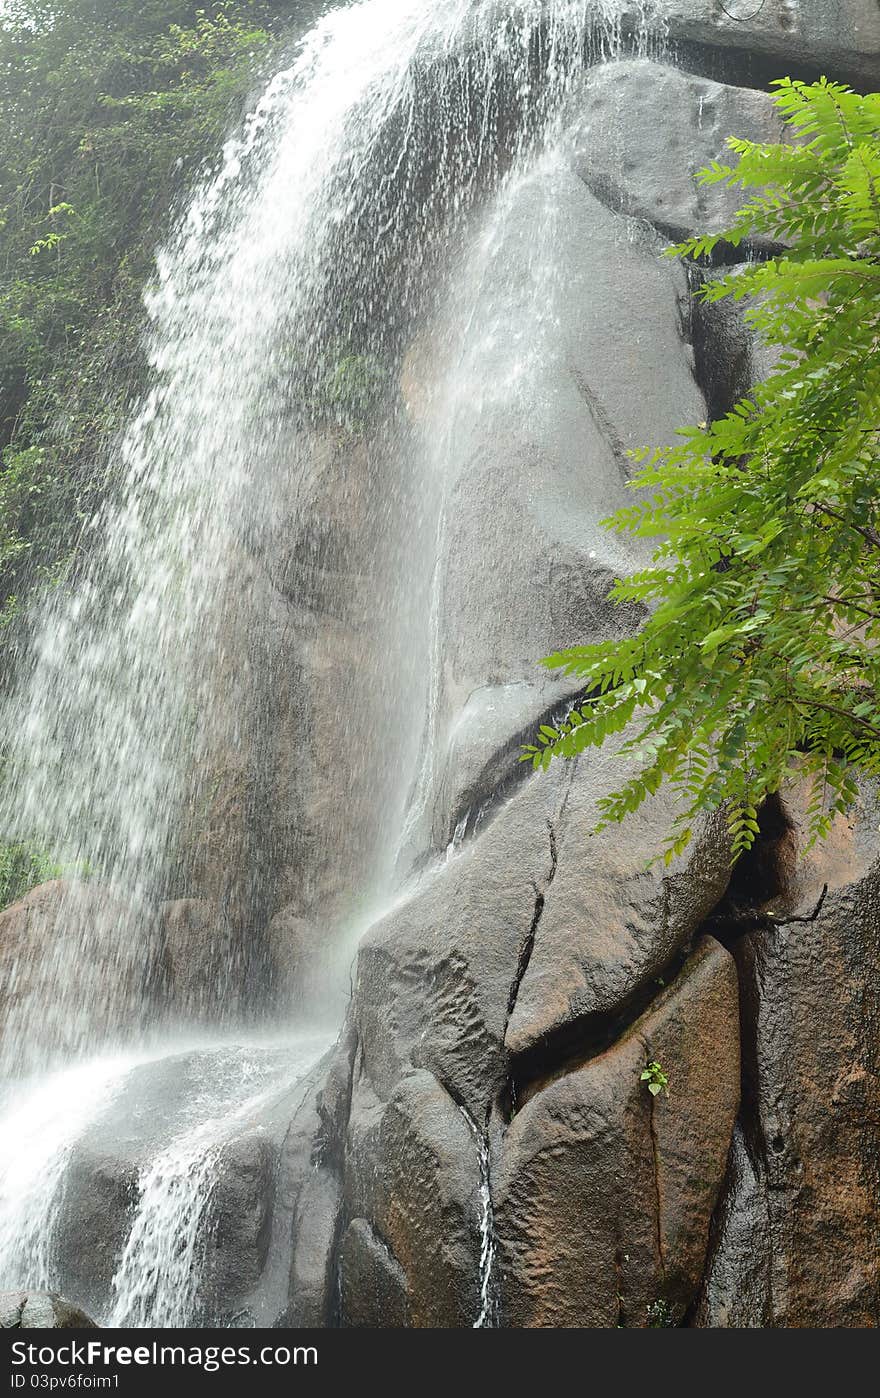 A waterfall is pouring down, showing grandeur and power. A waterfall is pouring down, showing grandeur and power.